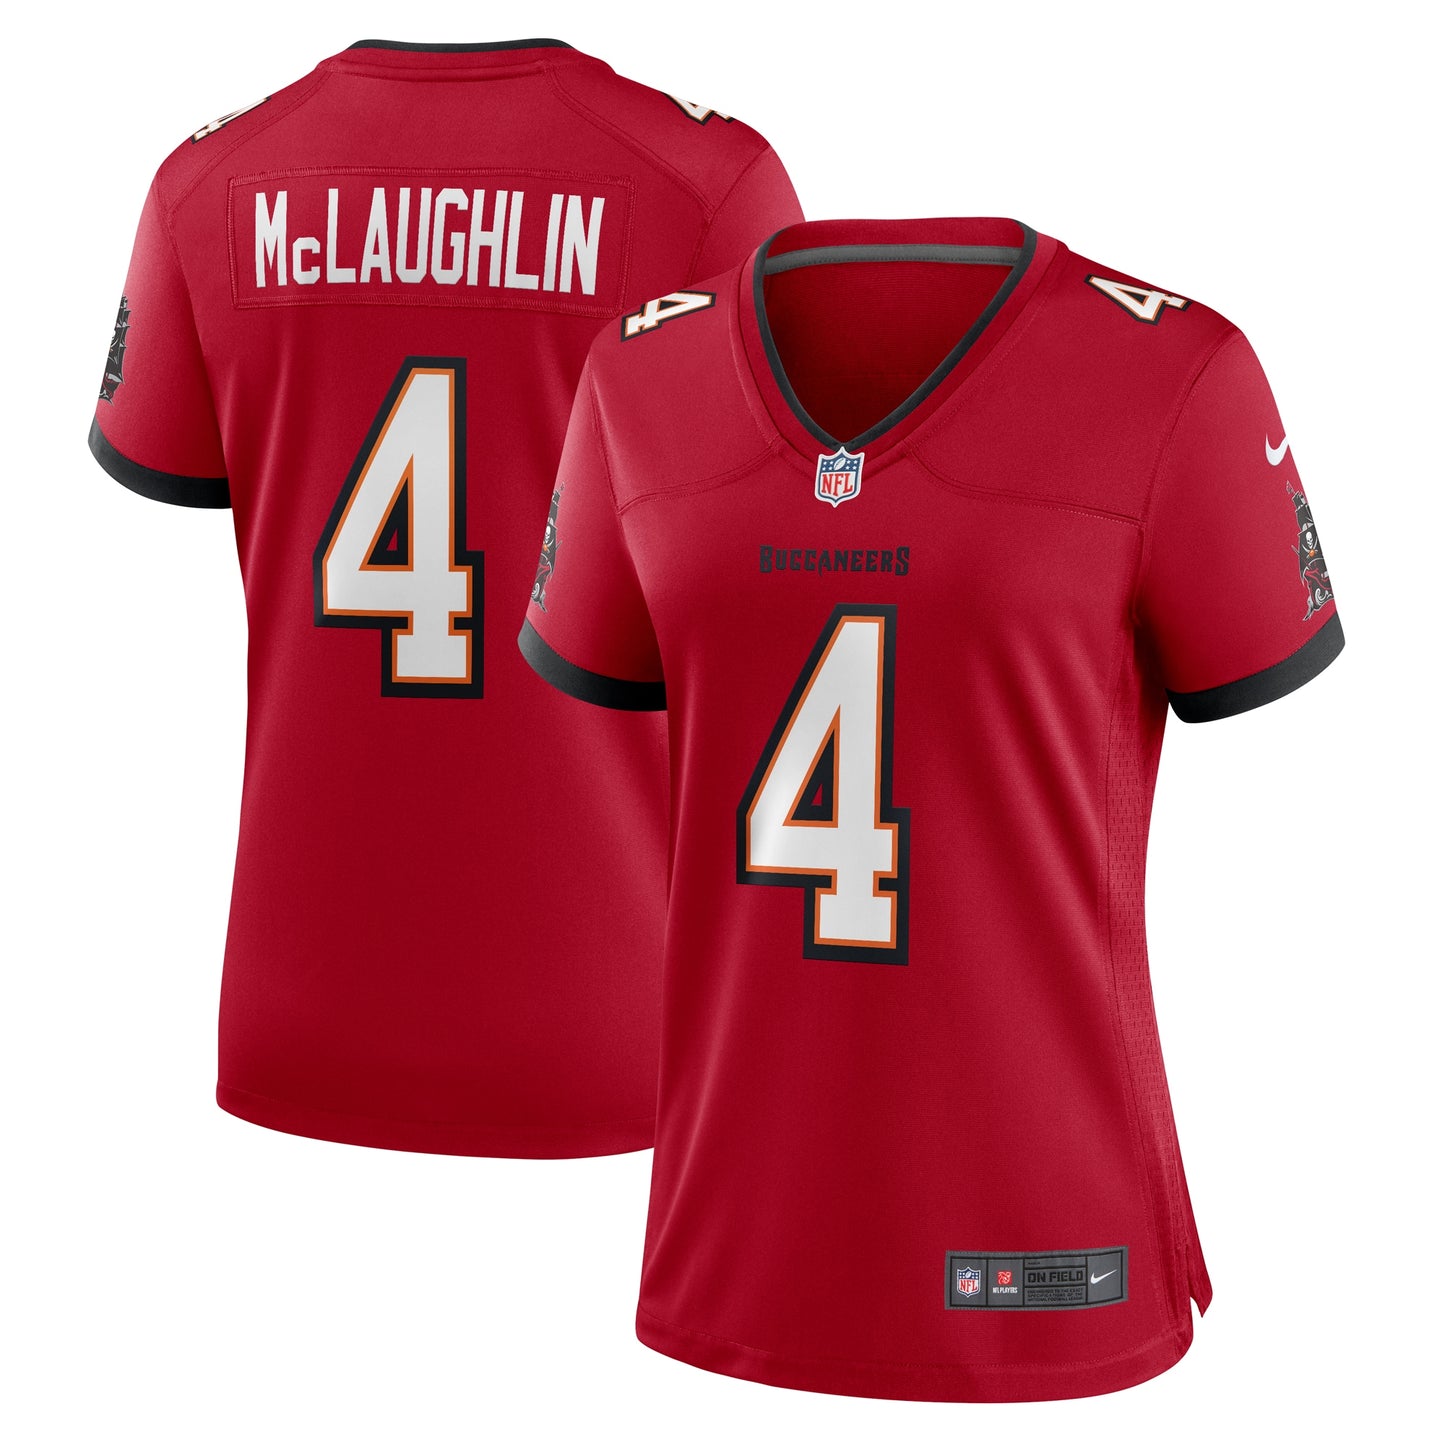 Chase McLaughlin Tampa Bay Buccaneers Nike Women's Game Player Jersey - Red